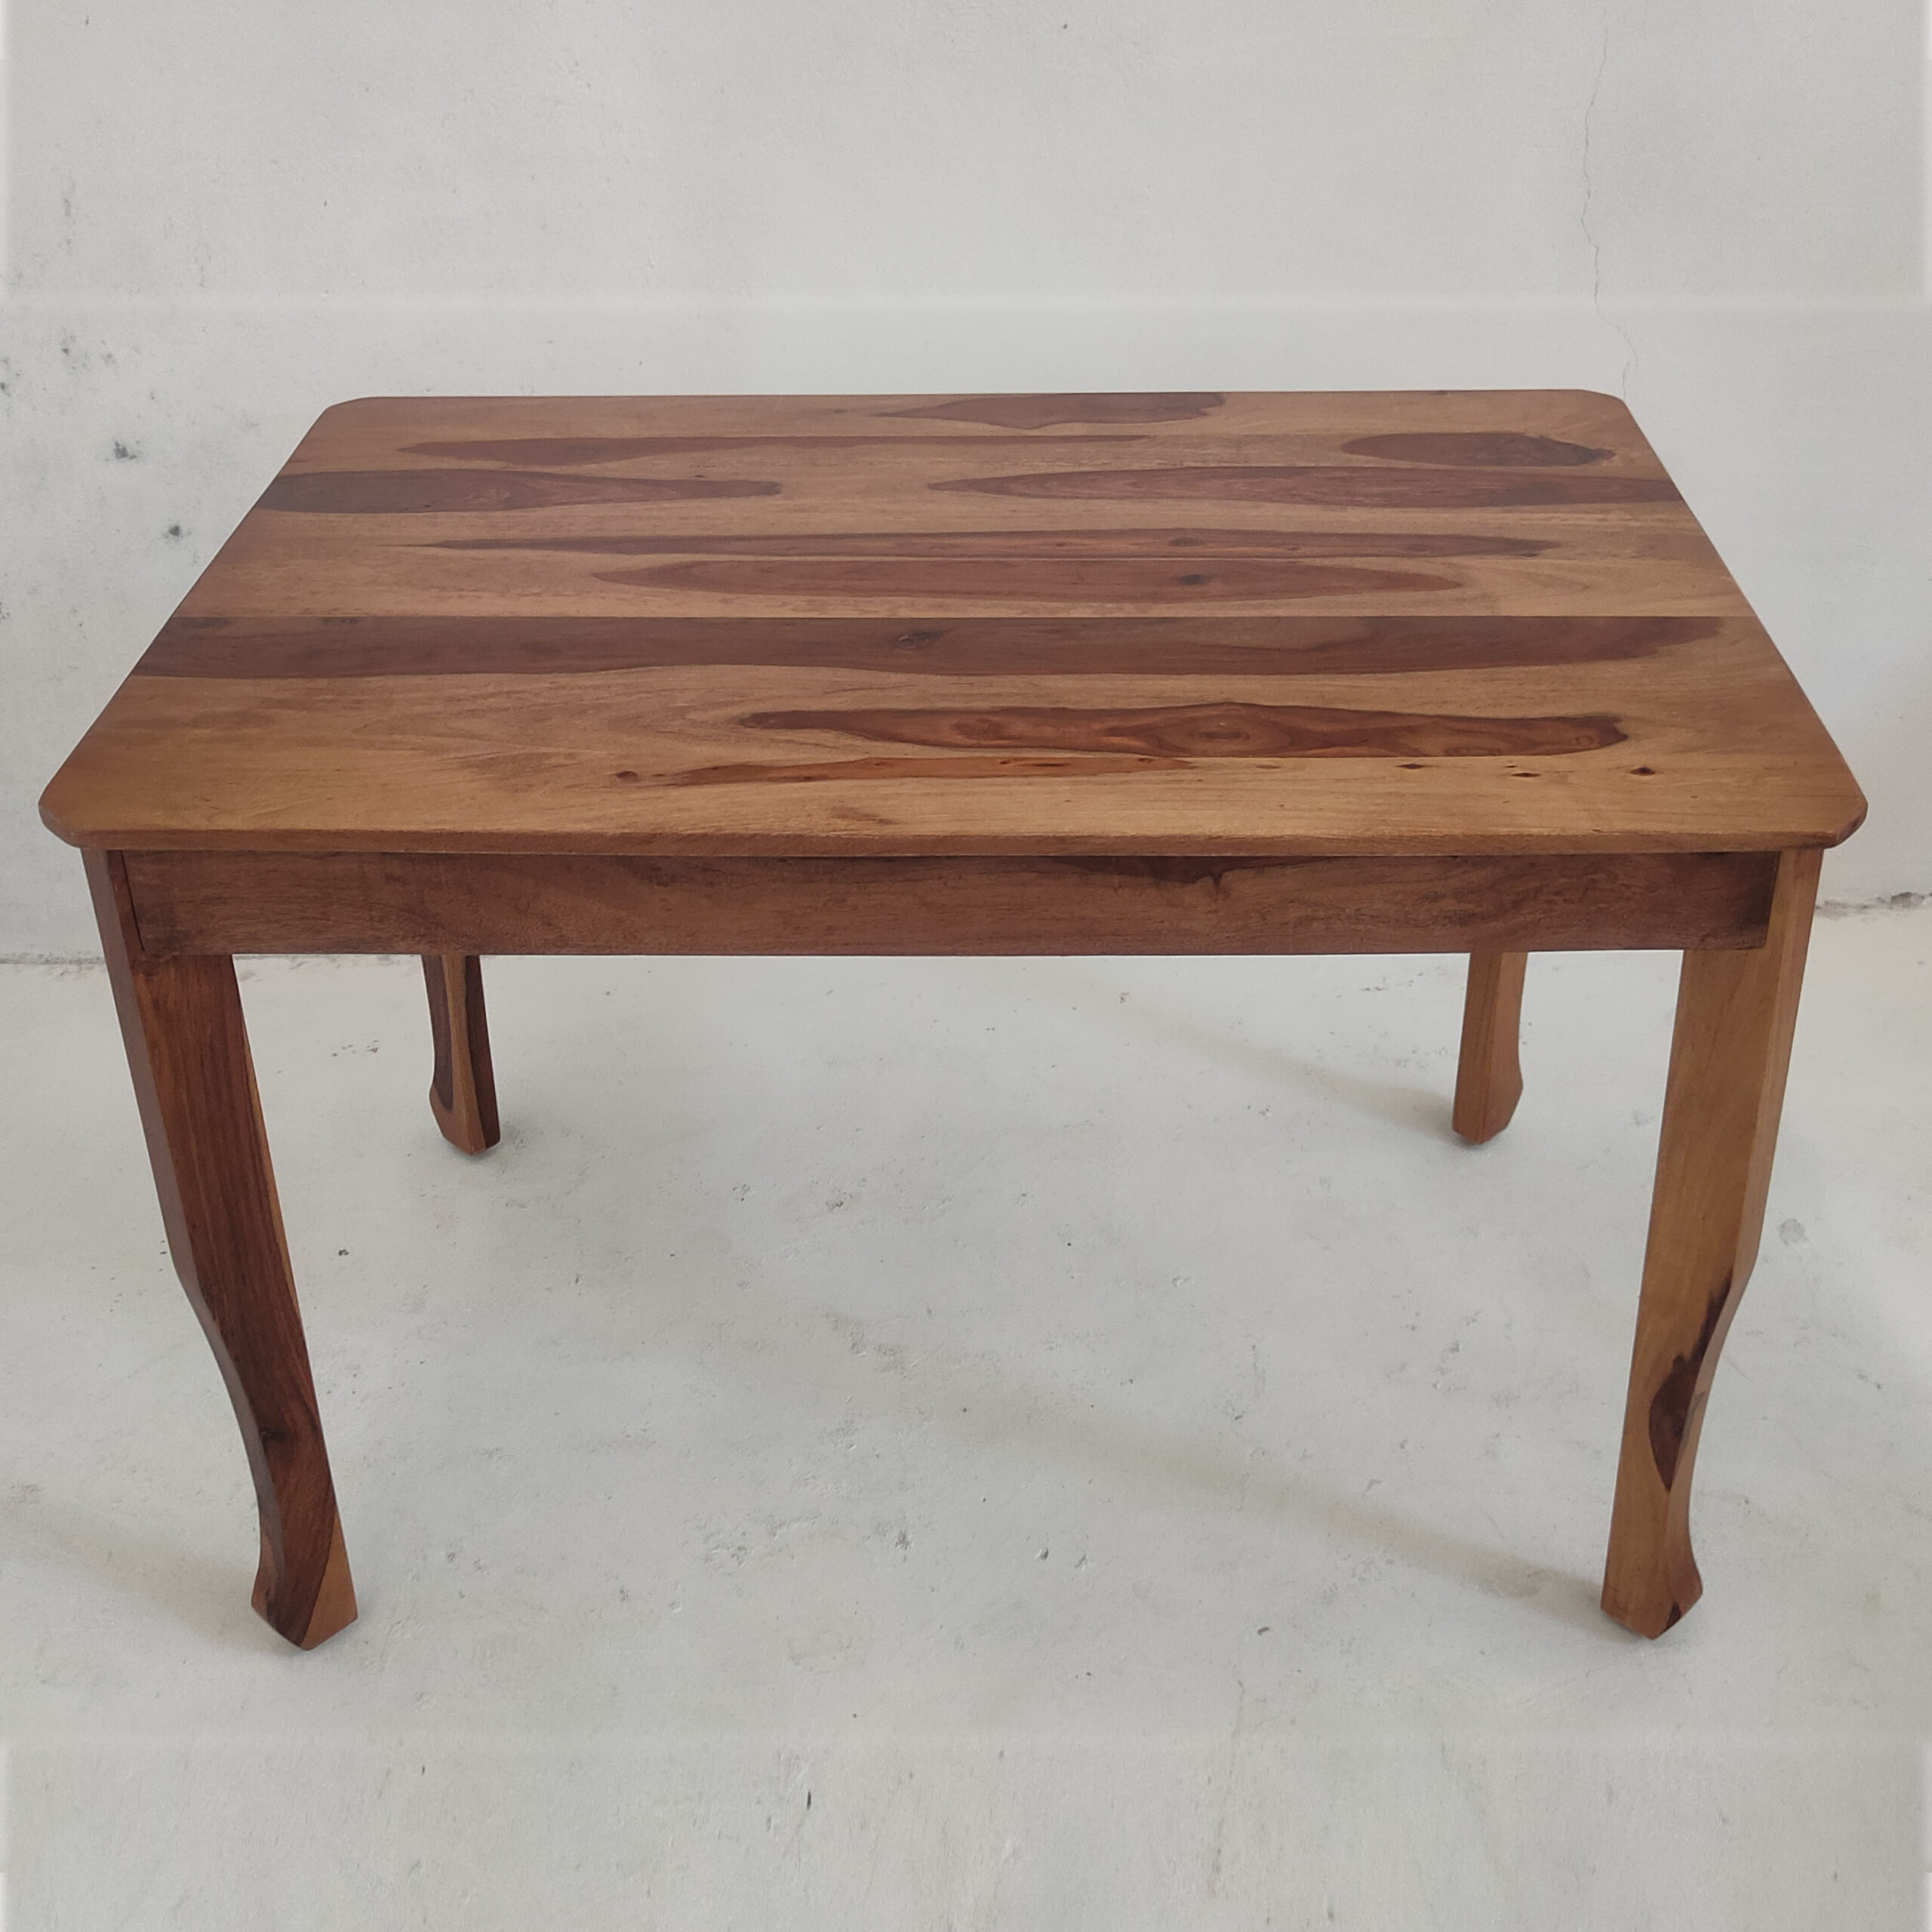 JOLLY SOLID WOOD RECTANGLE TABLE IN WALNUT FINISH